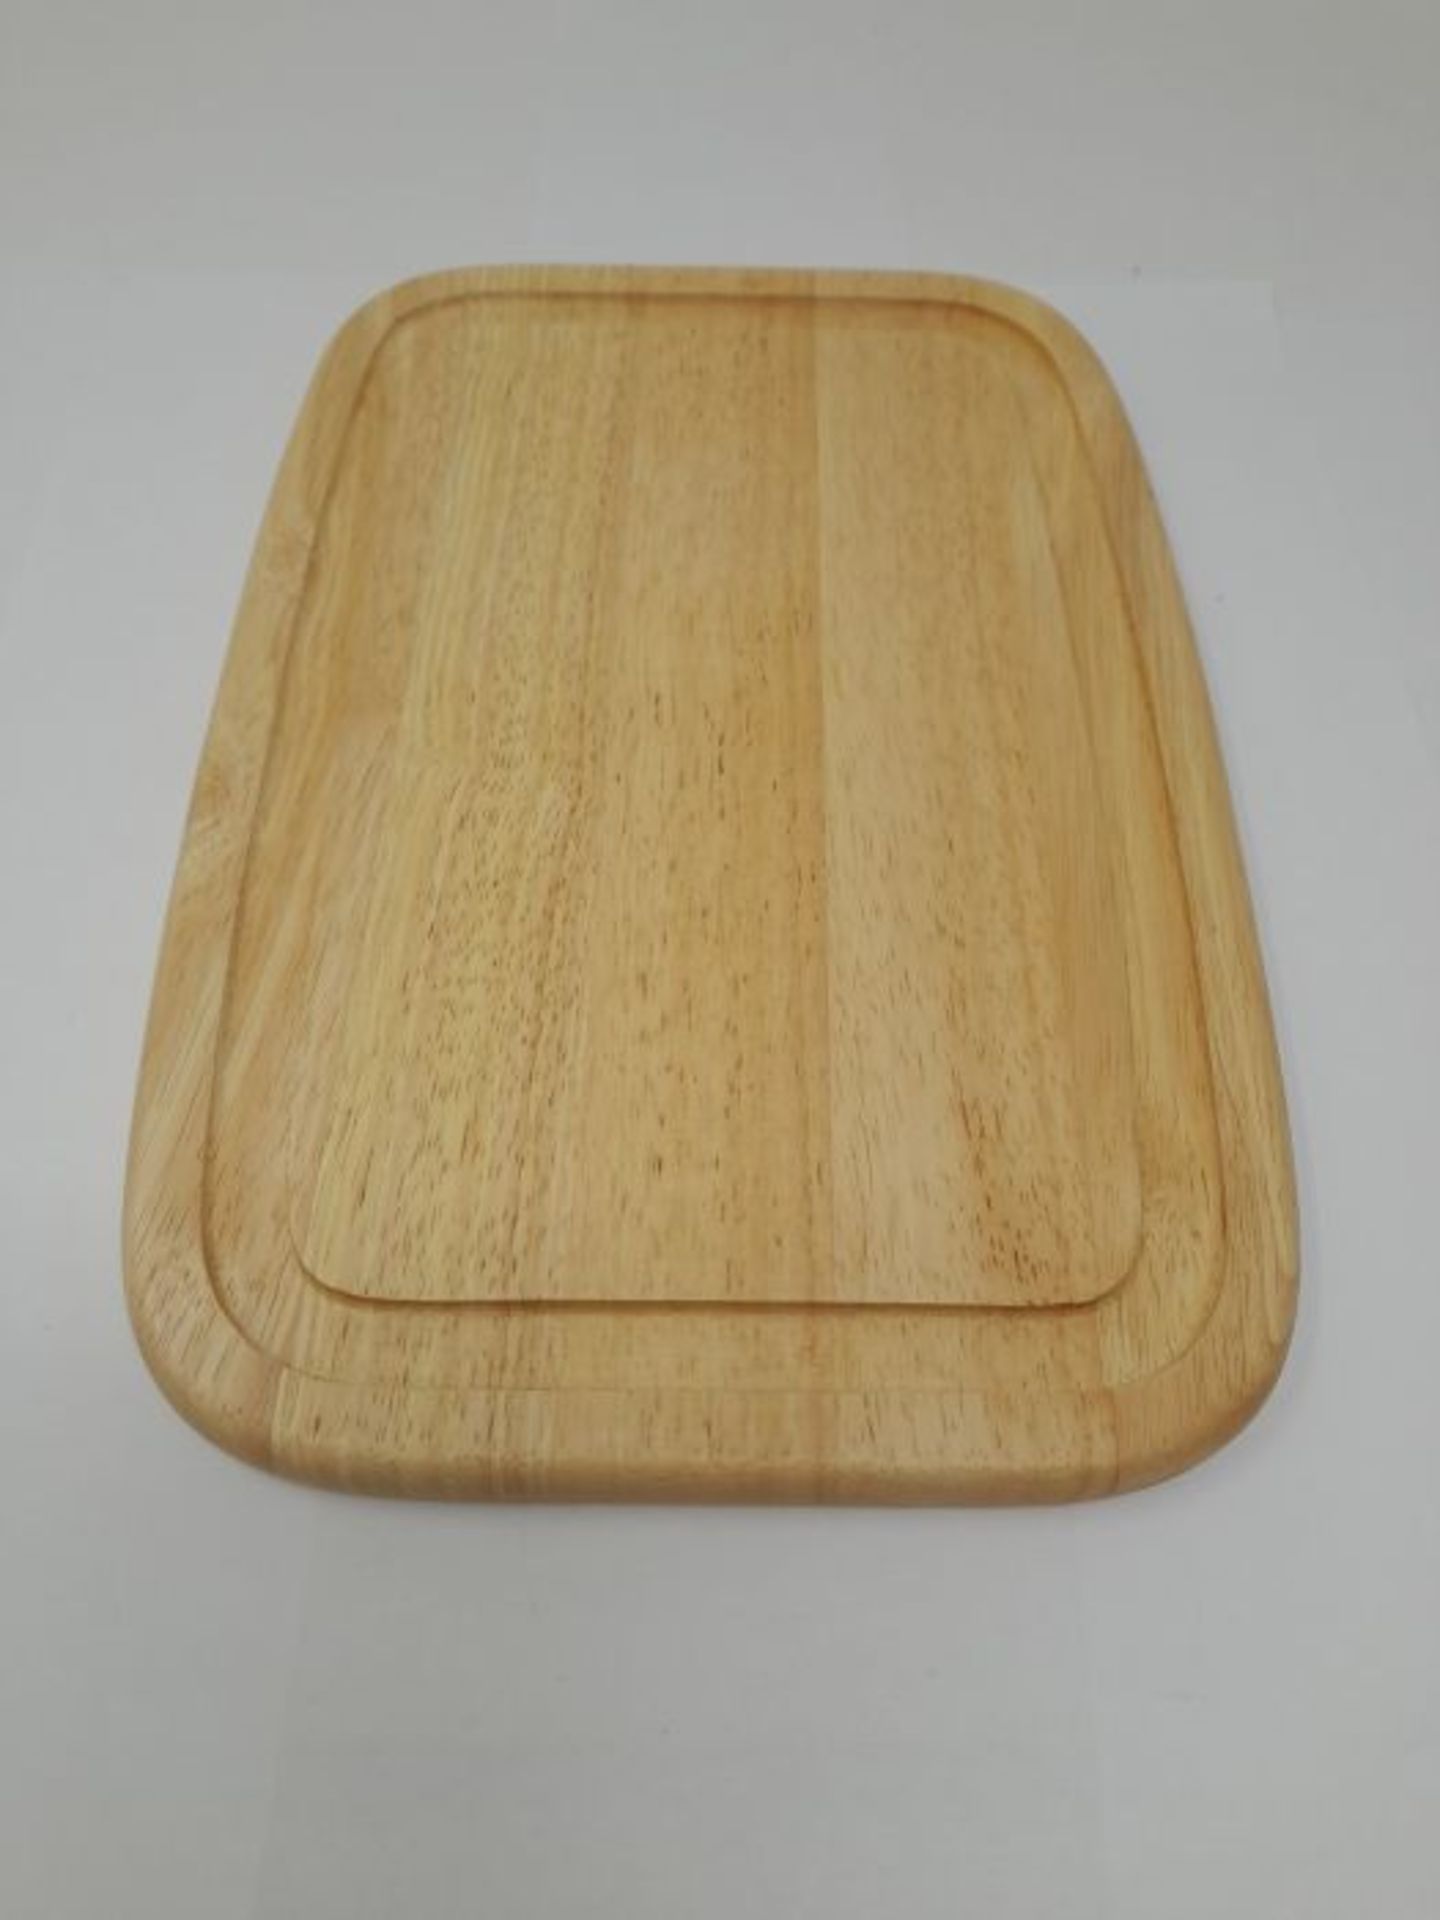 [INCOMPLETE] Continenta Rubber Tree Wood Cheese Cover with Cheese Board, Square, Size: - Image 2 of 3